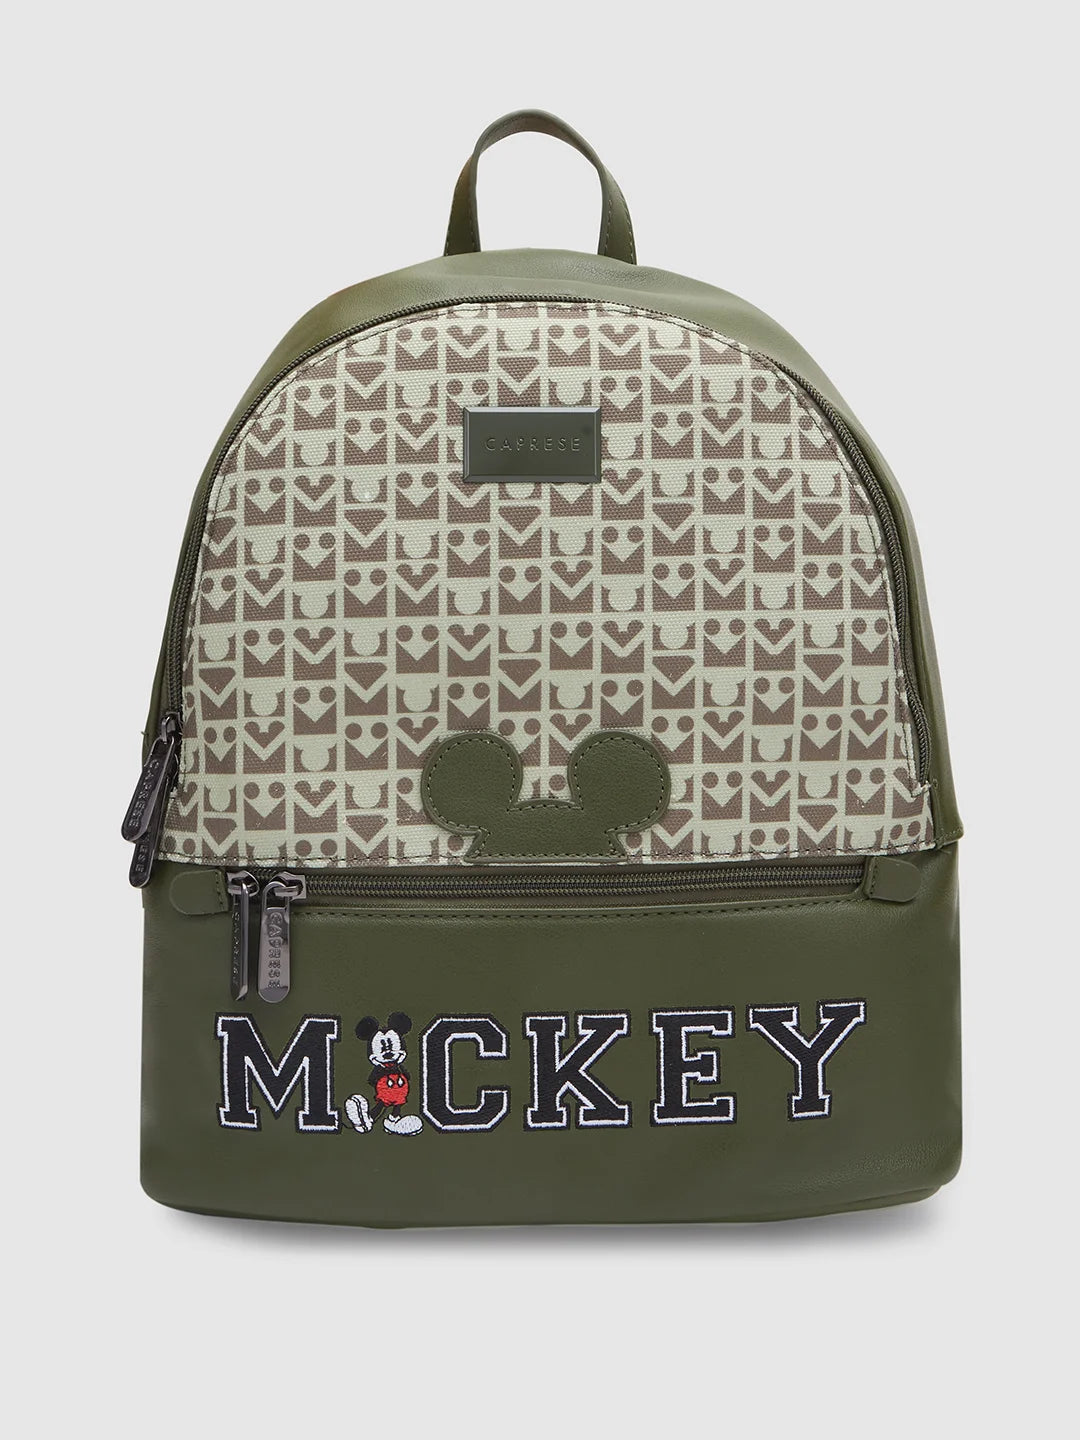 Caprese Disney Inspired Graphic Printed Mickey Mouse Collection Medium Backpack